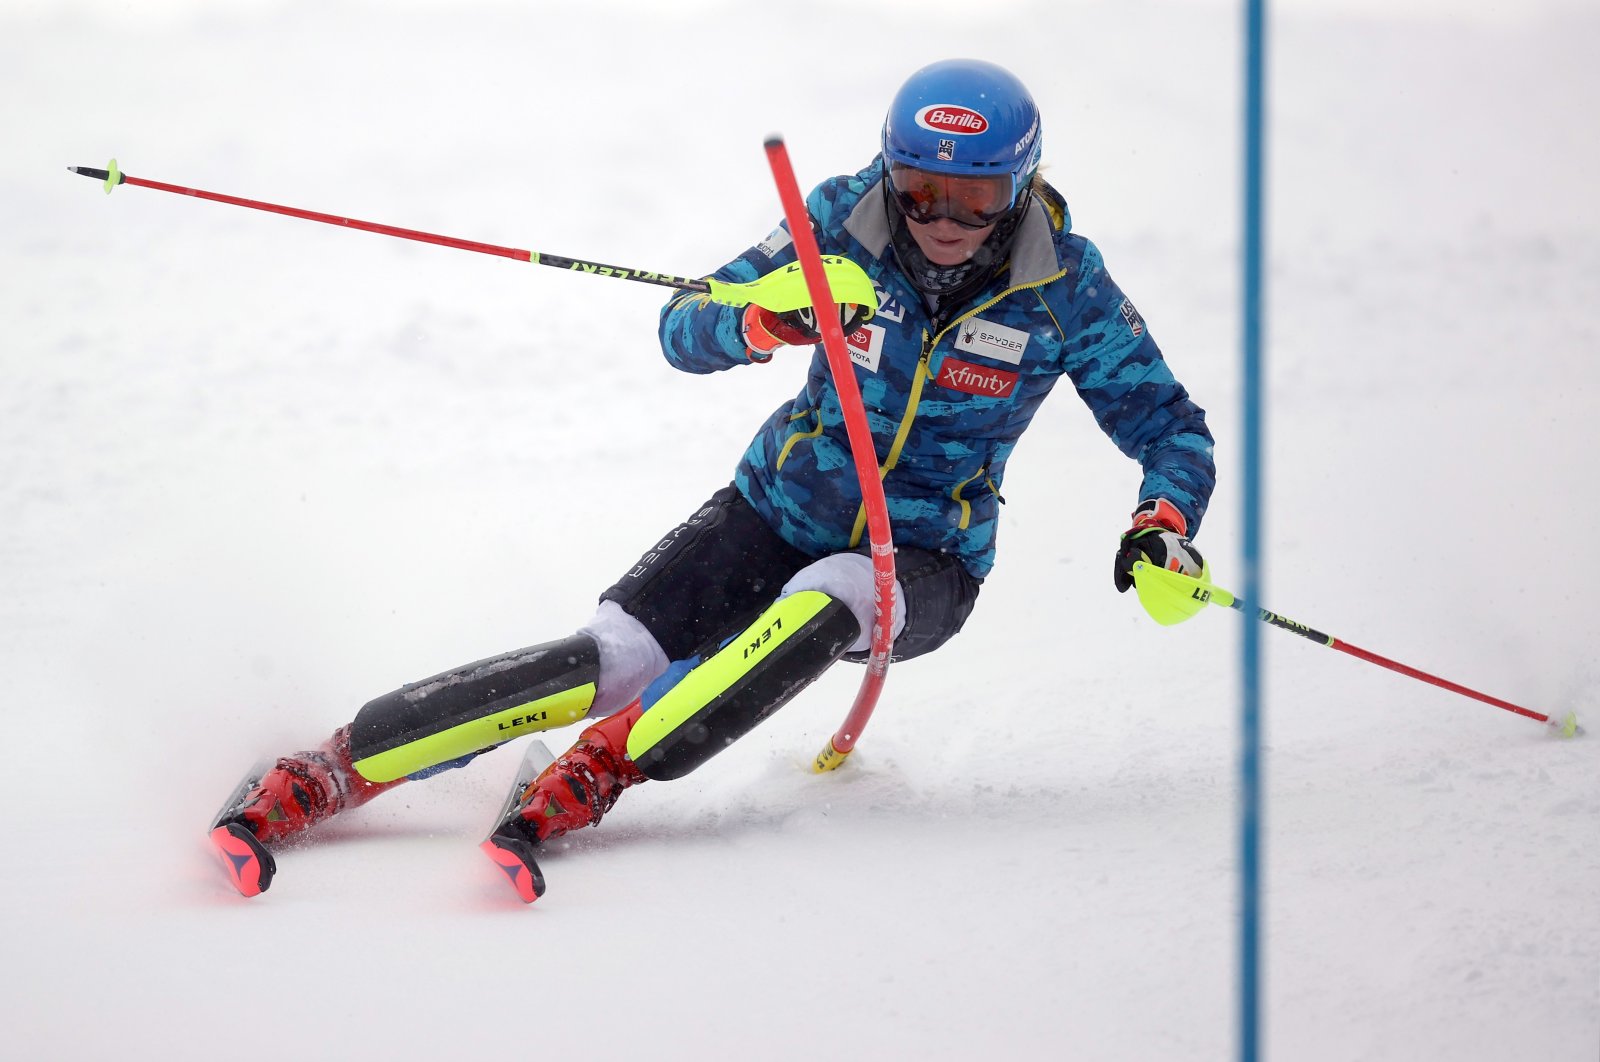 Mikaela Shiffrin skis during a training session, in Colorado, United States, Nov. 11, 2021. (AFP PHOTO) 